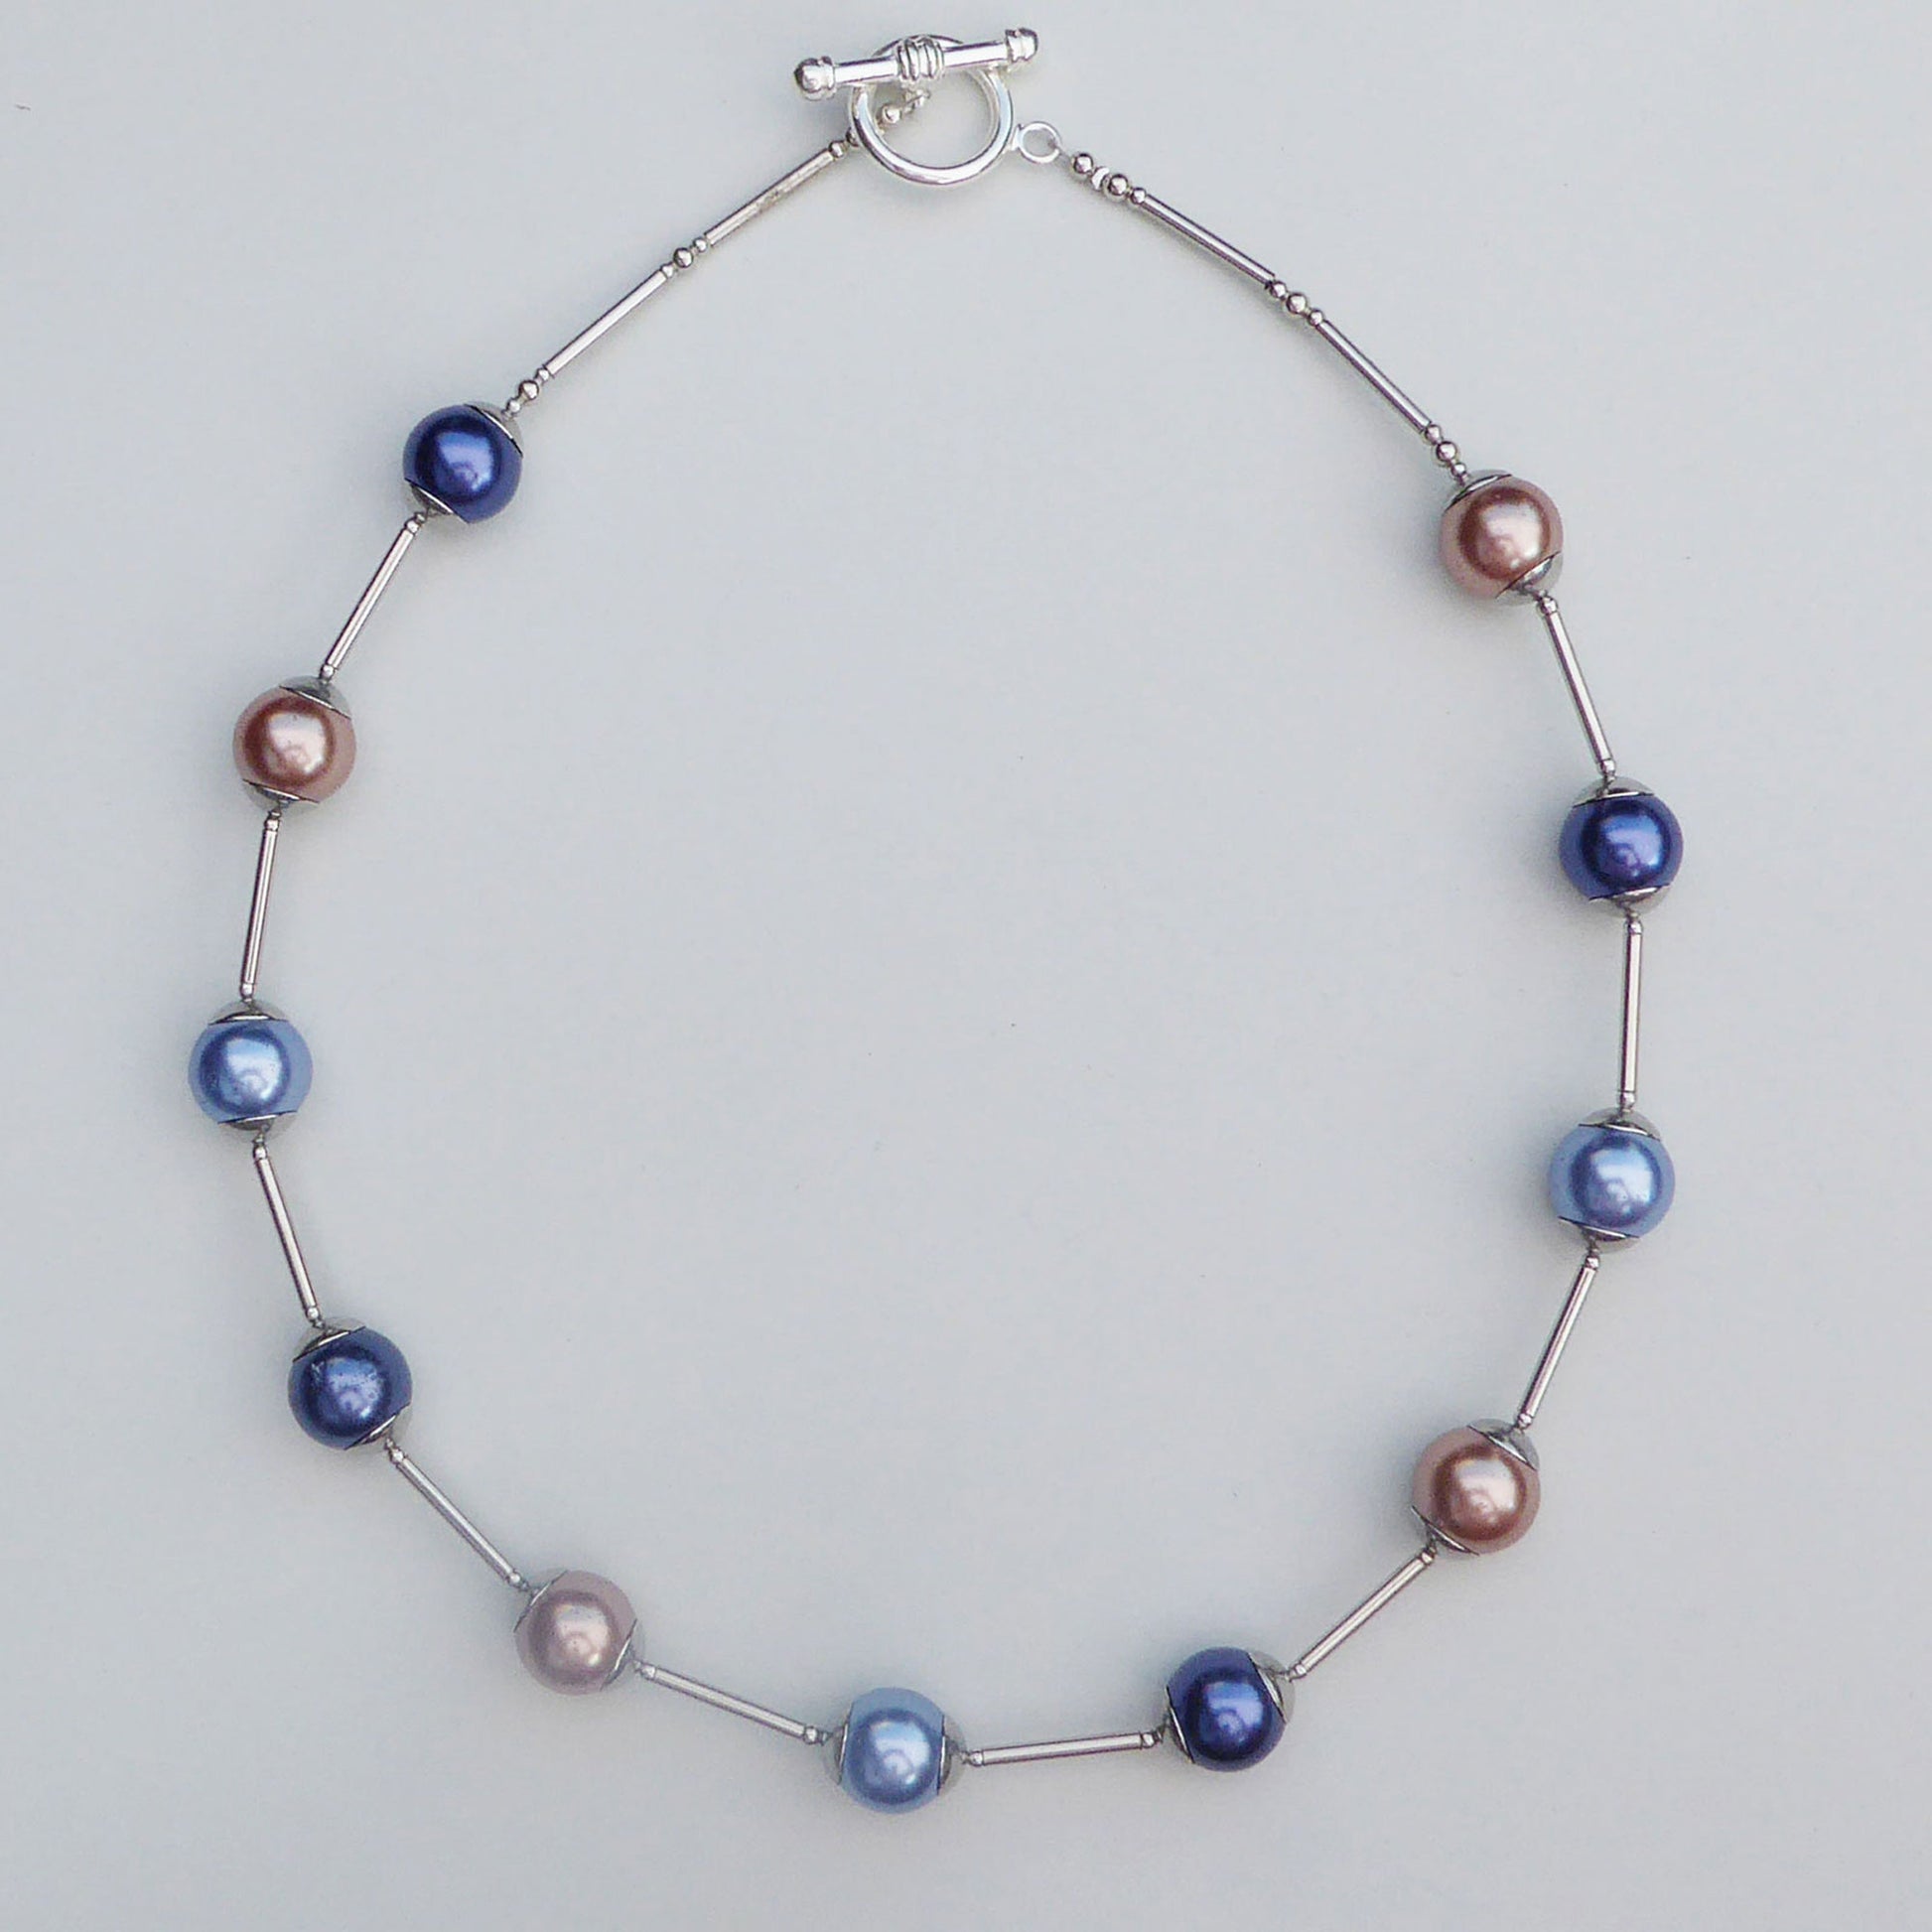 Glass pearl orb-style necklace in blues and brown